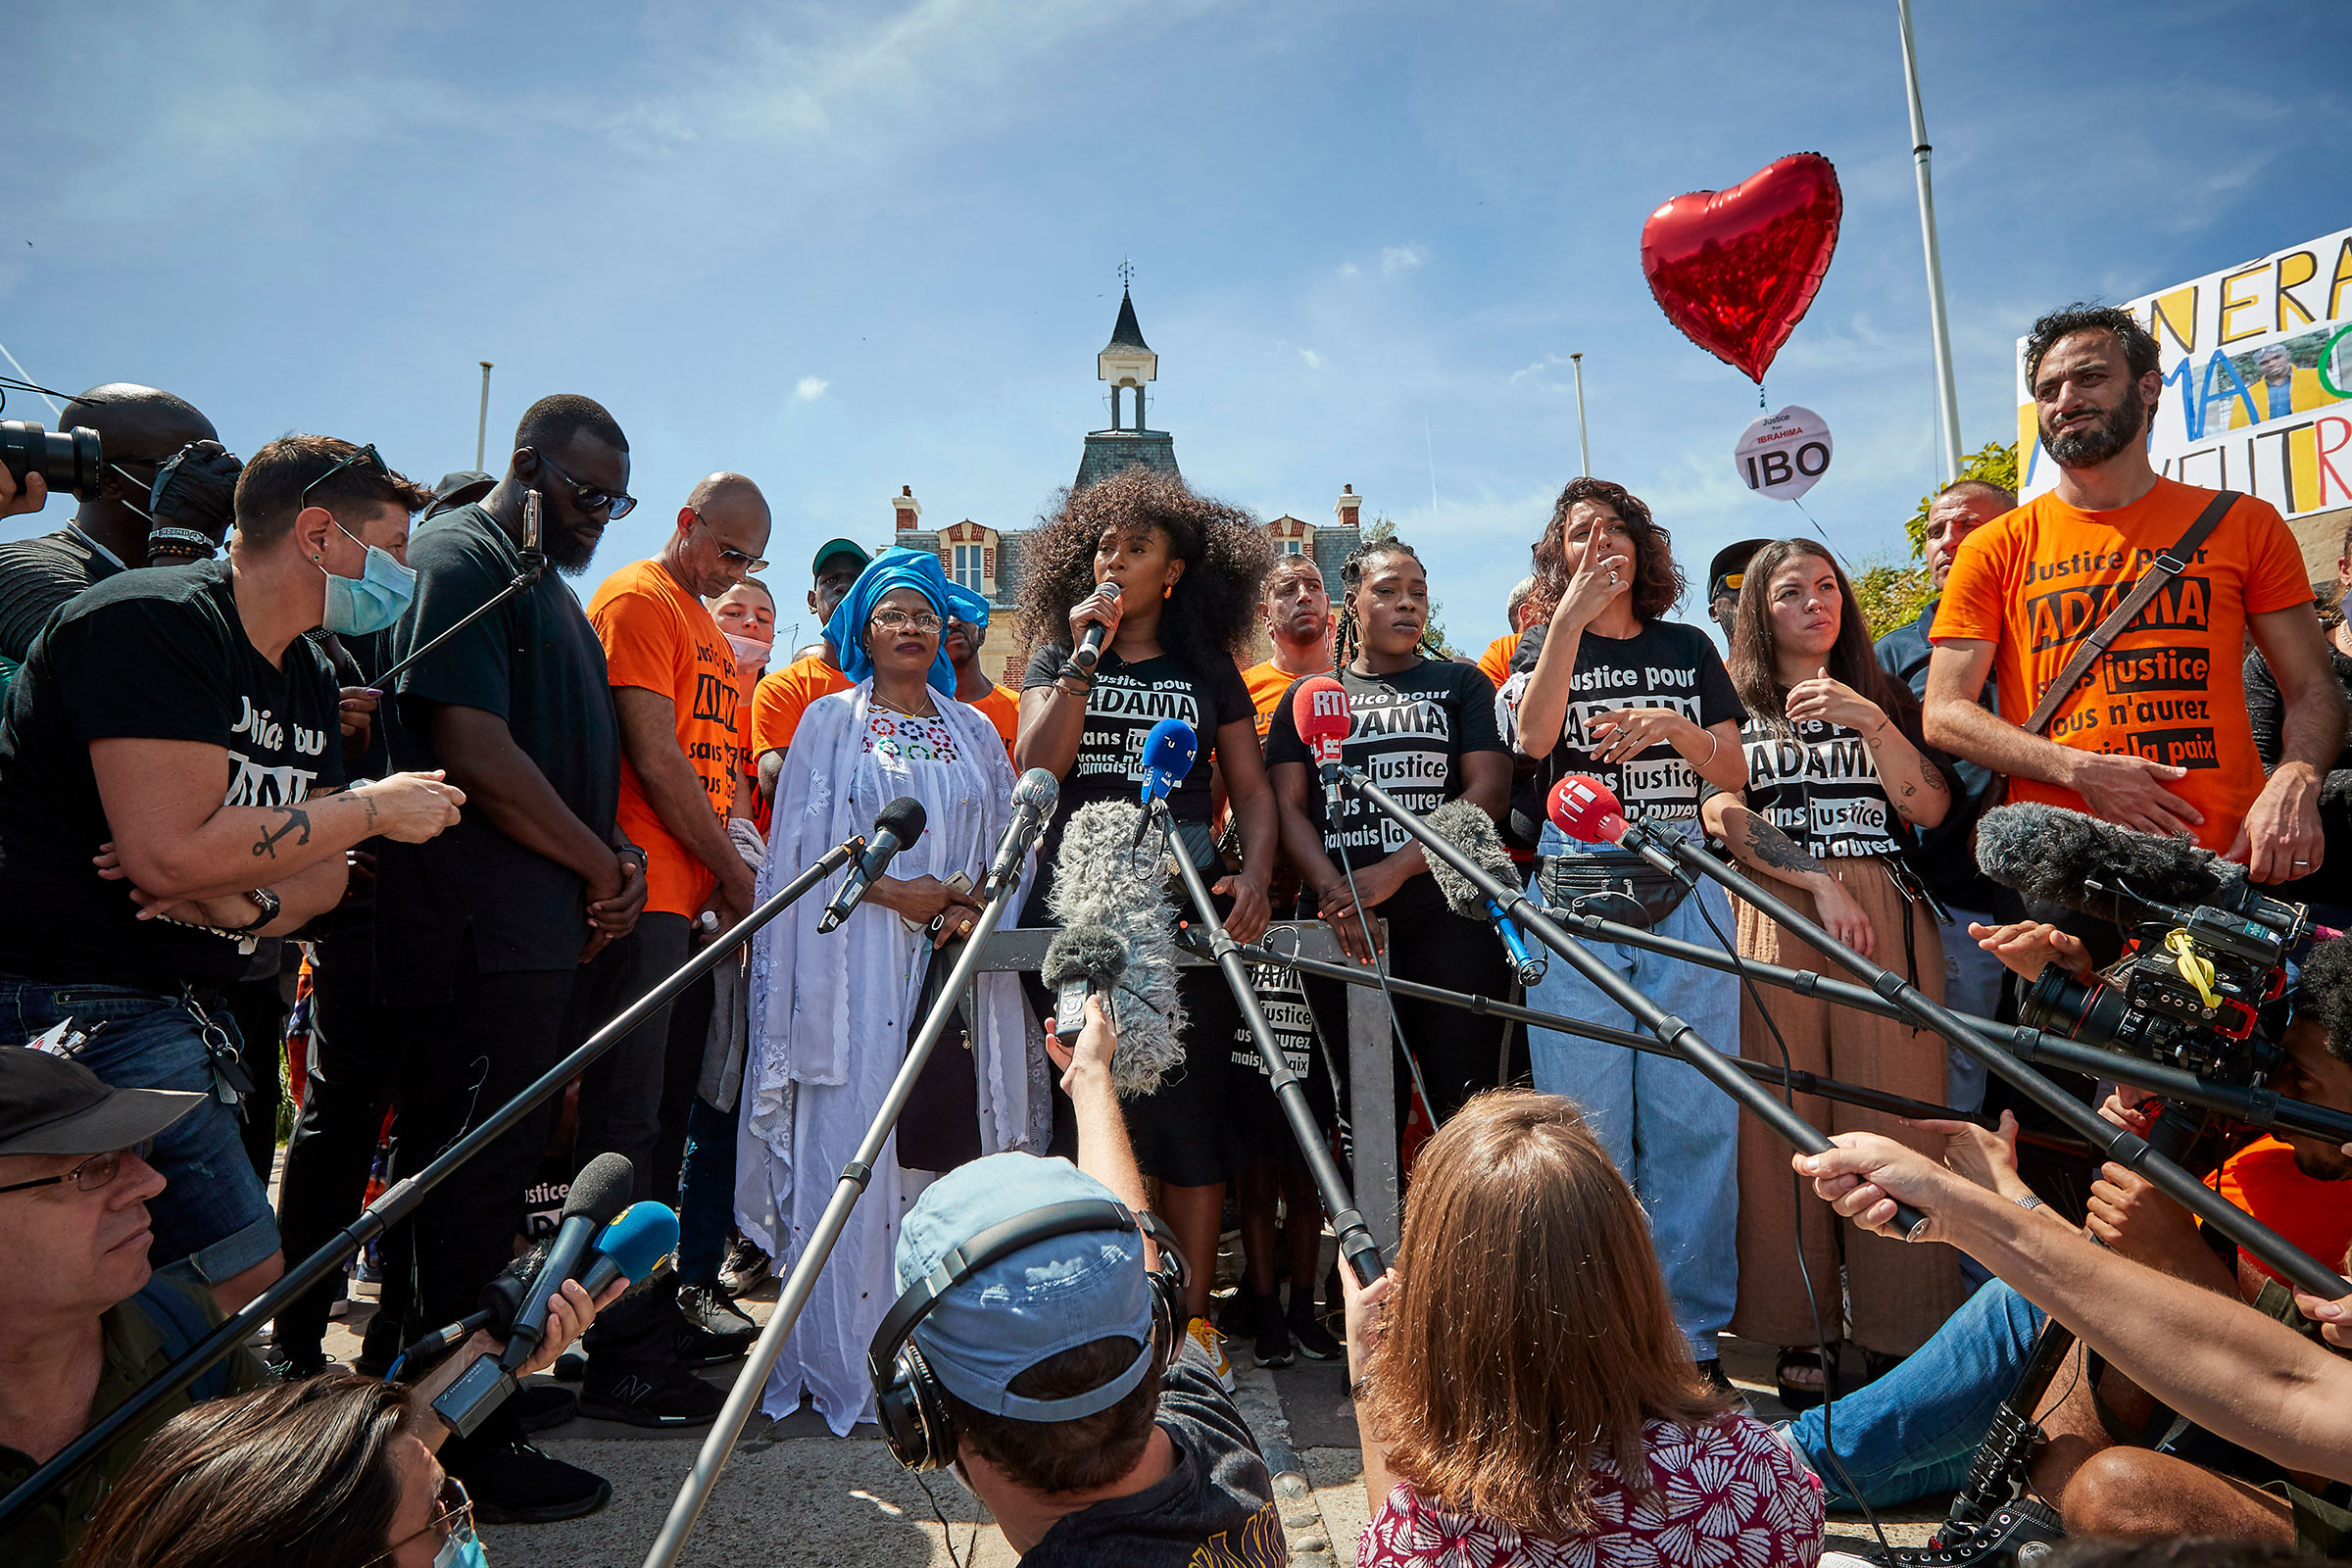 Assa Traoré gives a press conference to commemorate the anniversary of the death of her brother, Adama Traoré, who died in police custody, Persan, France, July 18, 2020. (Kiran Ridley—Getty Images)